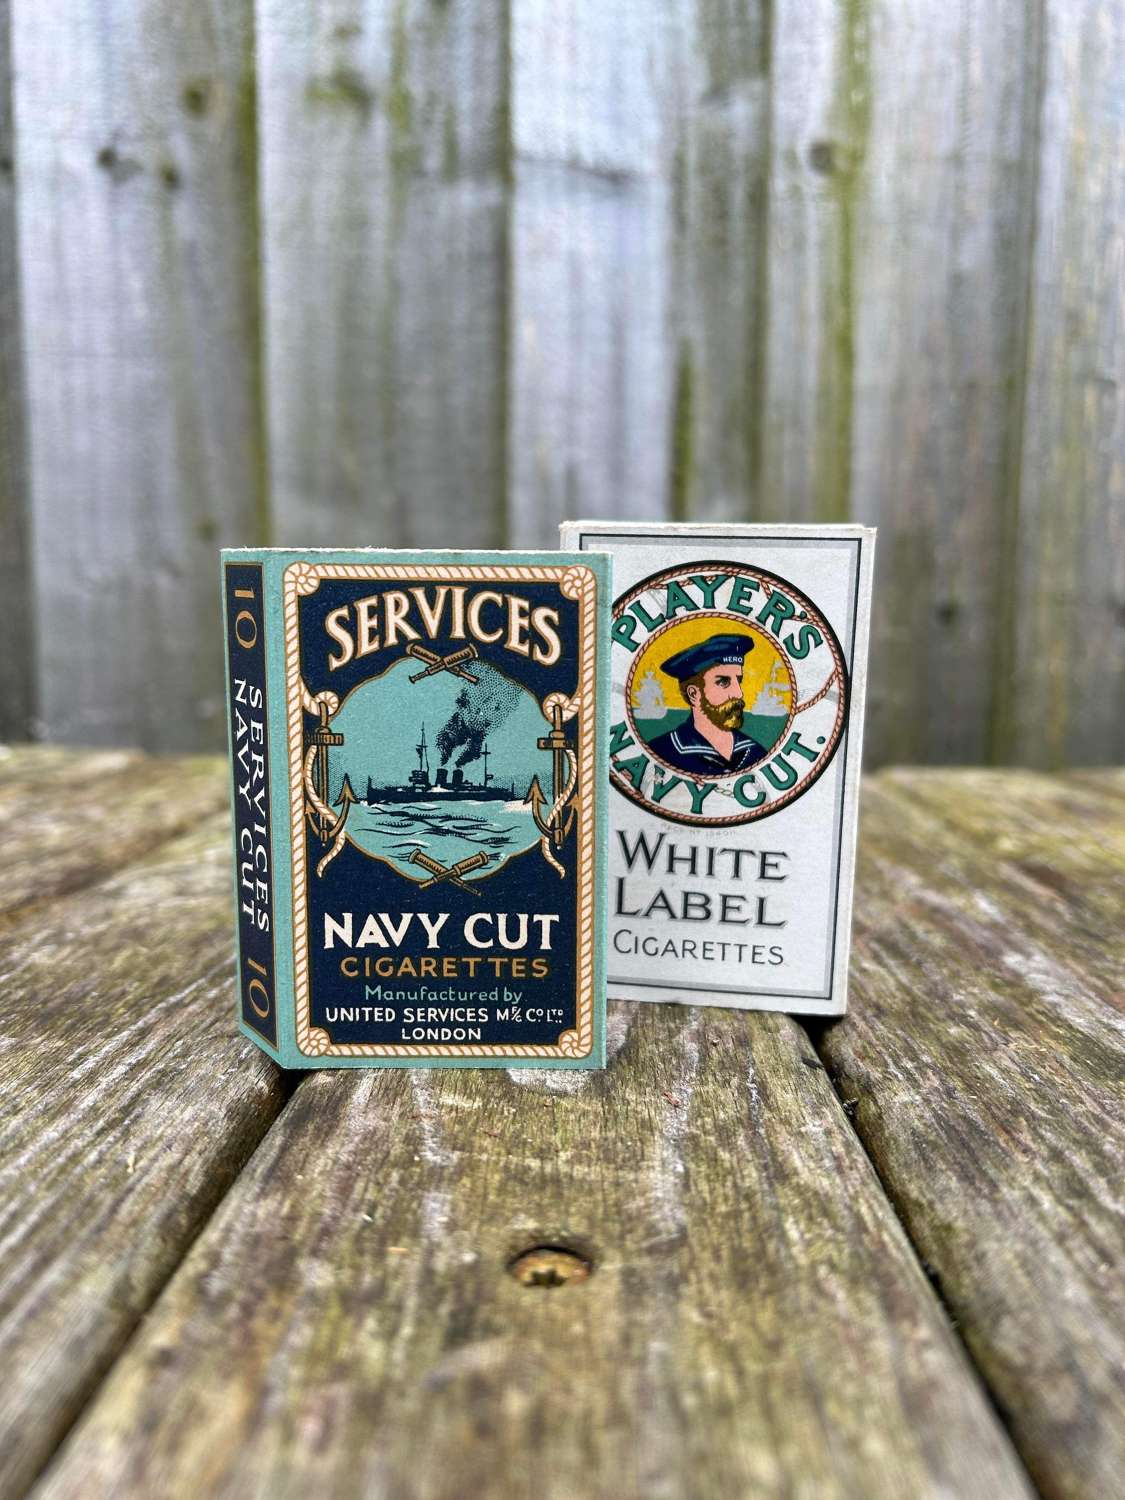 2 lovely navy related cigarette packets